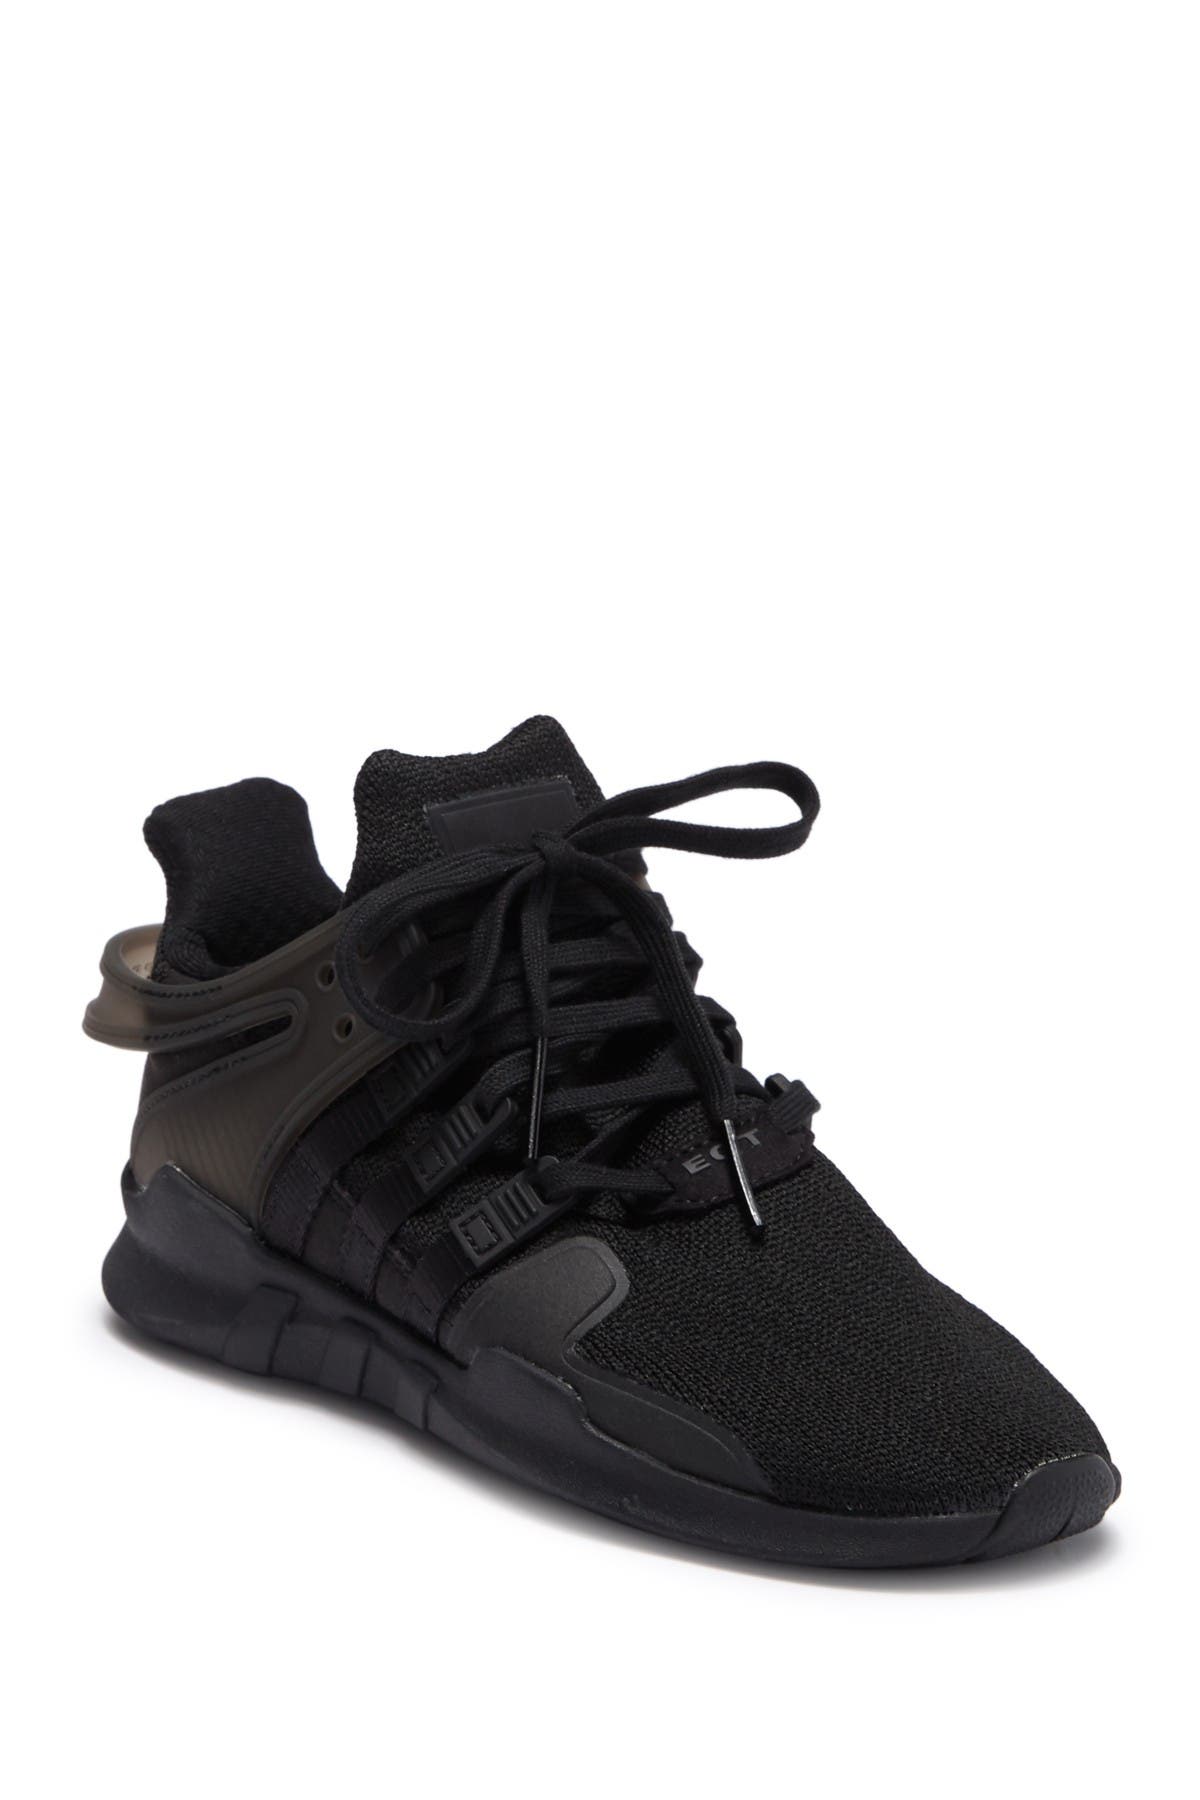 adidas sneakers eqt support adv